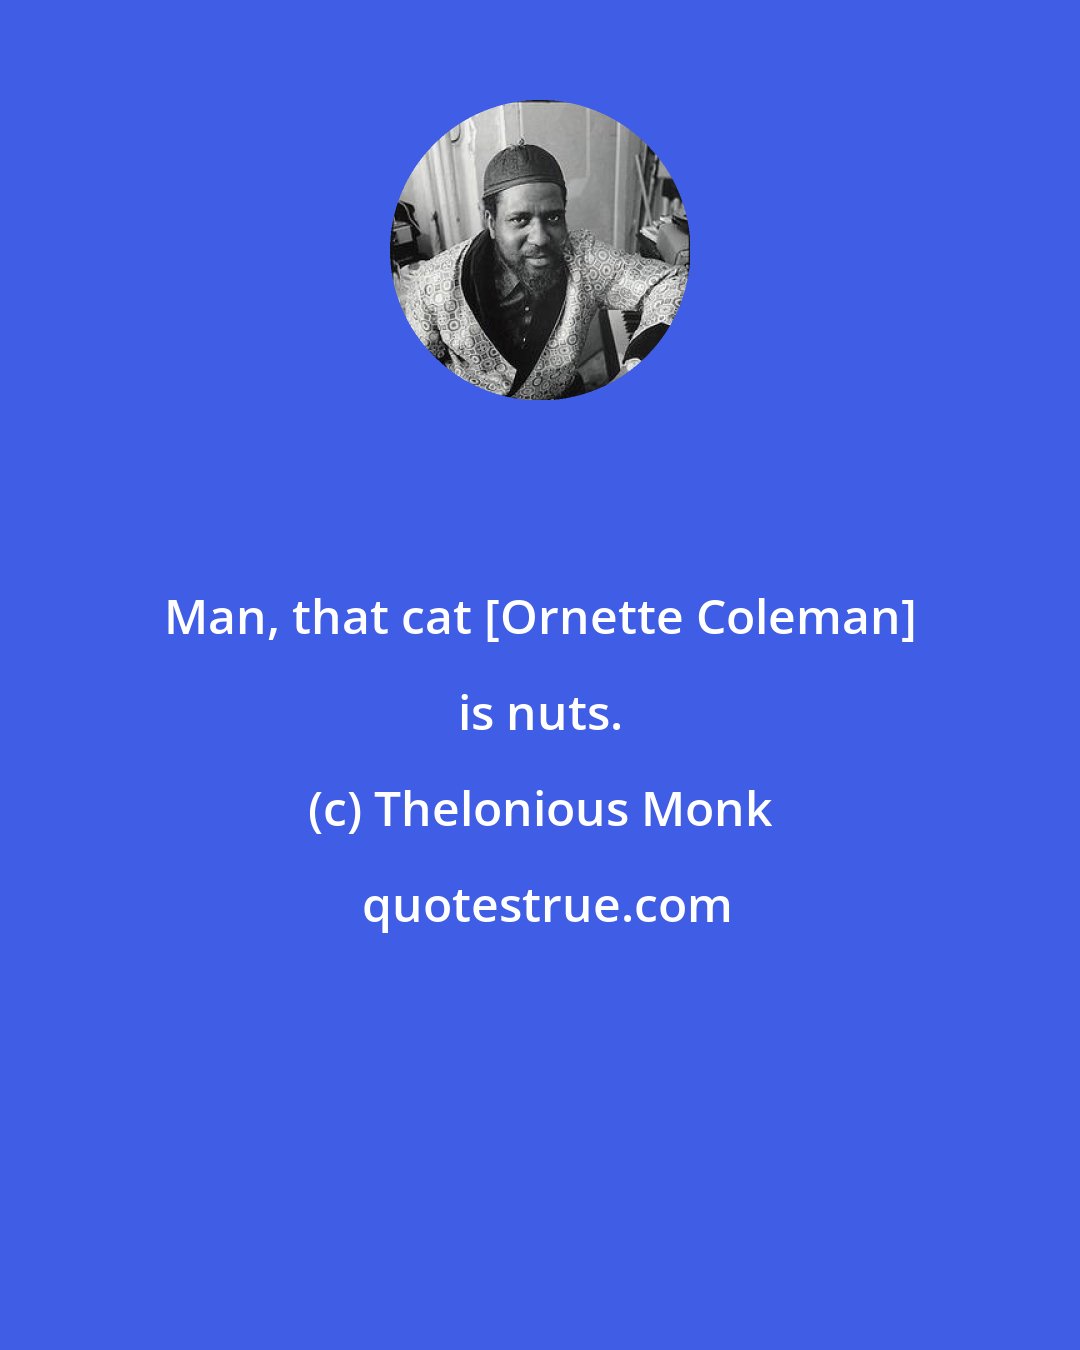 Thelonious Monk: Man, that cat [Ornette Coleman] is nuts.